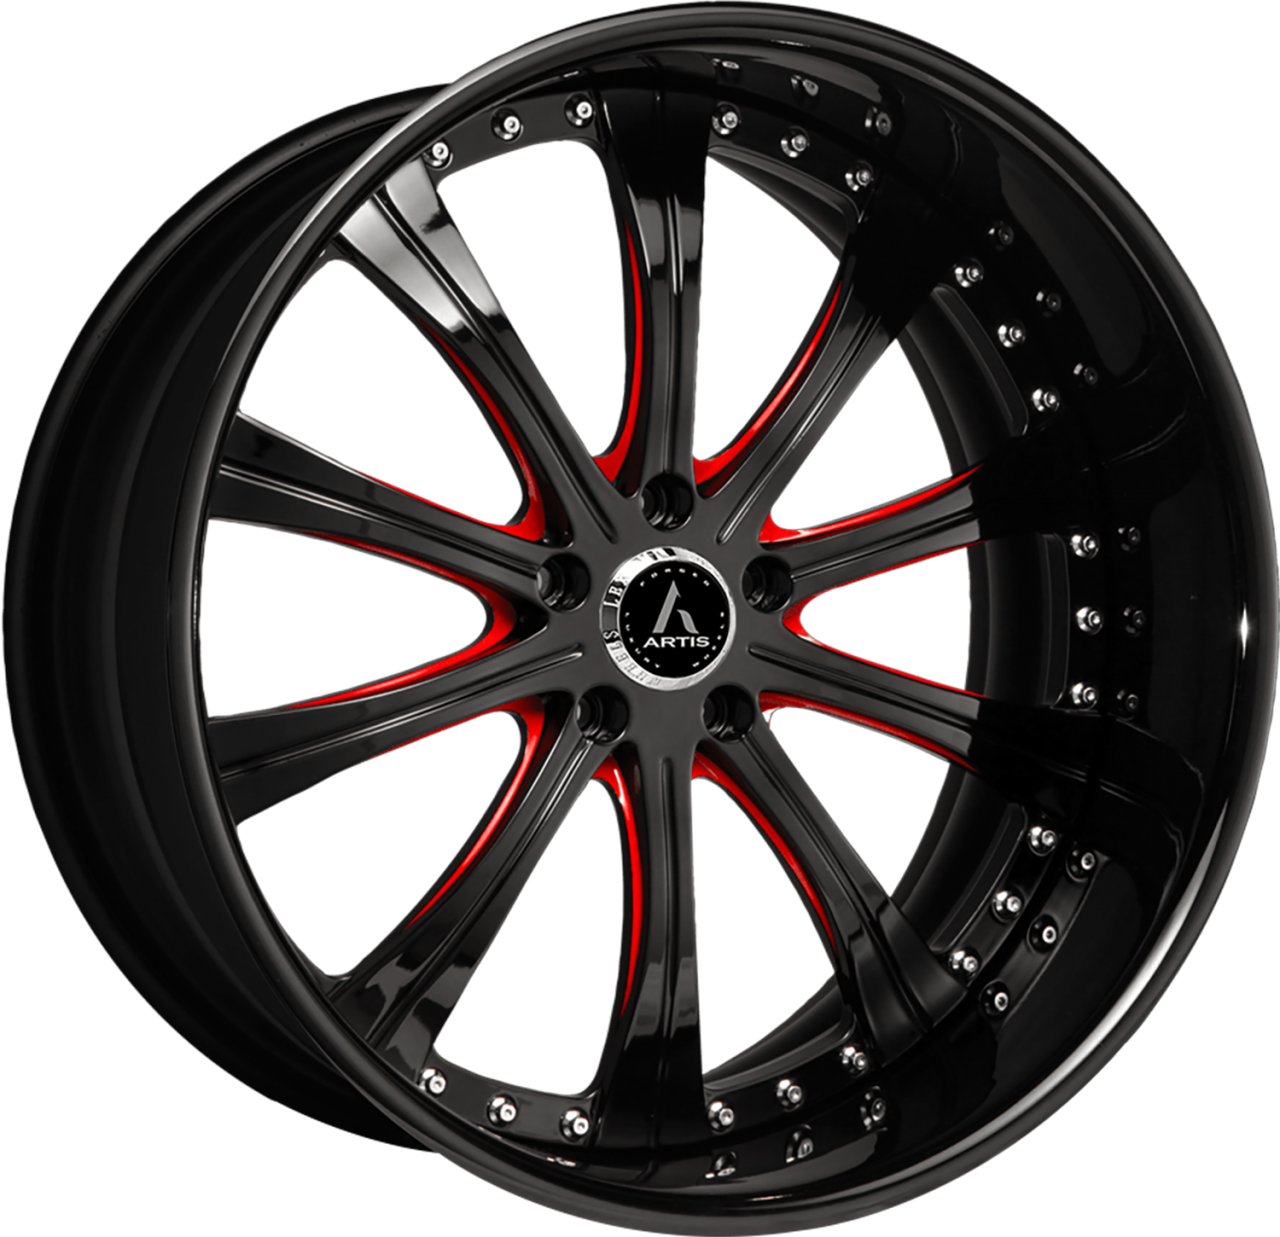 Artis Forged Oak Cliff wheel with Custom Black with Red Accents finish